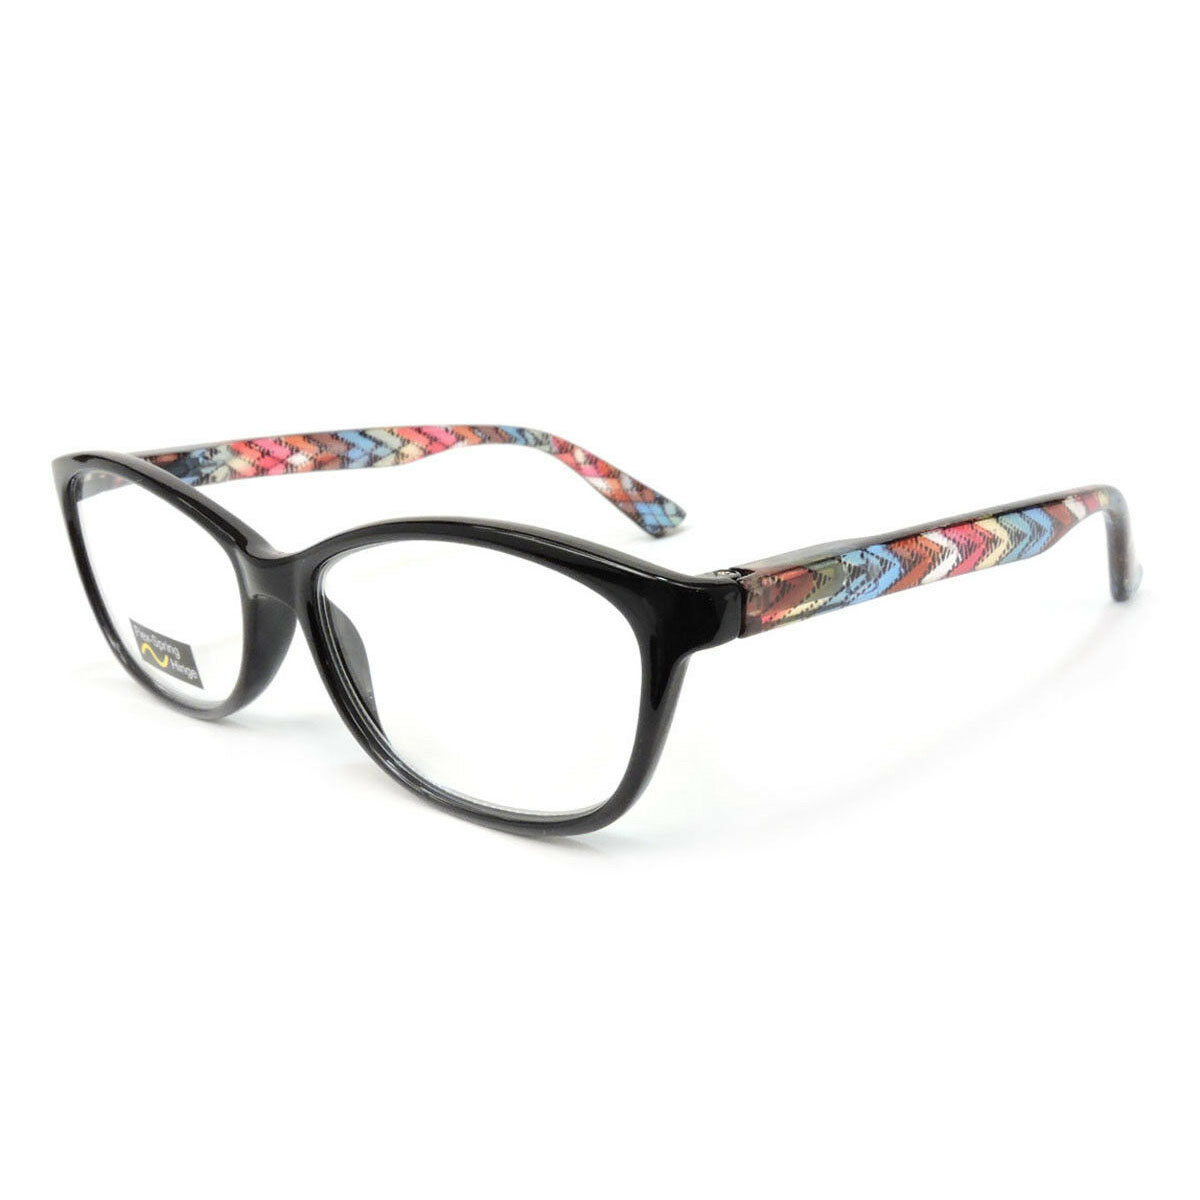 Classic Frame Reading Glasses Colorful Arms Retro Vintage Style - Red, +1.50